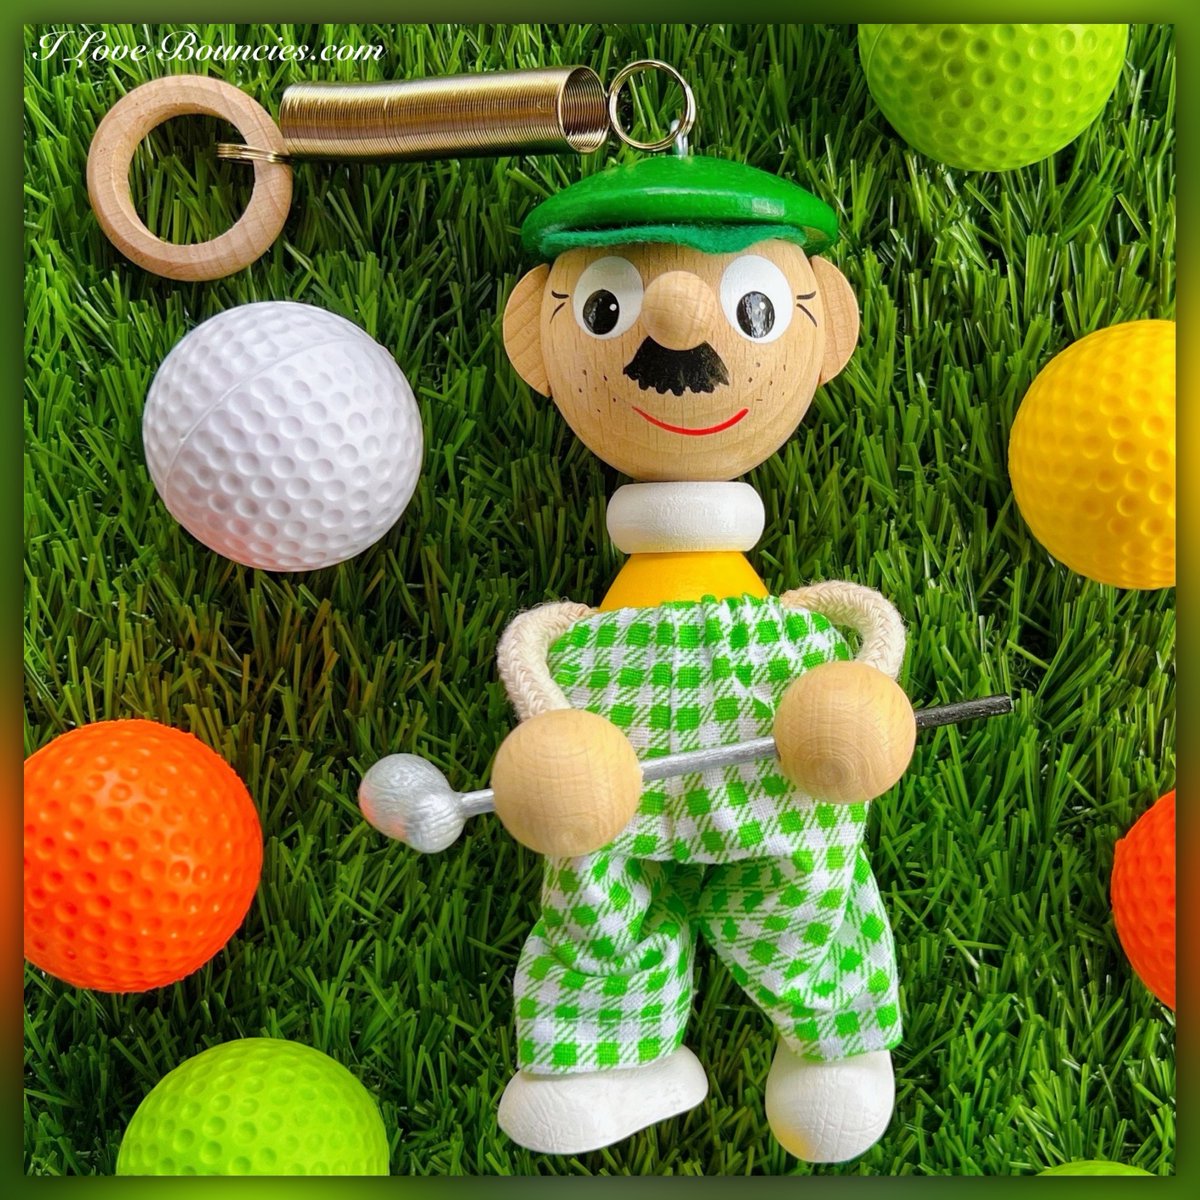 “I've always made a total effort, even when the odds seemed entirely against me. I never quit 𝒷ℴ𝓊𝓃𝒸𝒾𝓃'; I never felt that I didn't have a chance to win.' -Arnold Palmer⛳️🏌️‍♀️

ilovebouncies.etsy.com

#ArnoldPalmer #PGA #PGATour #PGAChamp #EtsySale #NationalSmallBusinessWeek